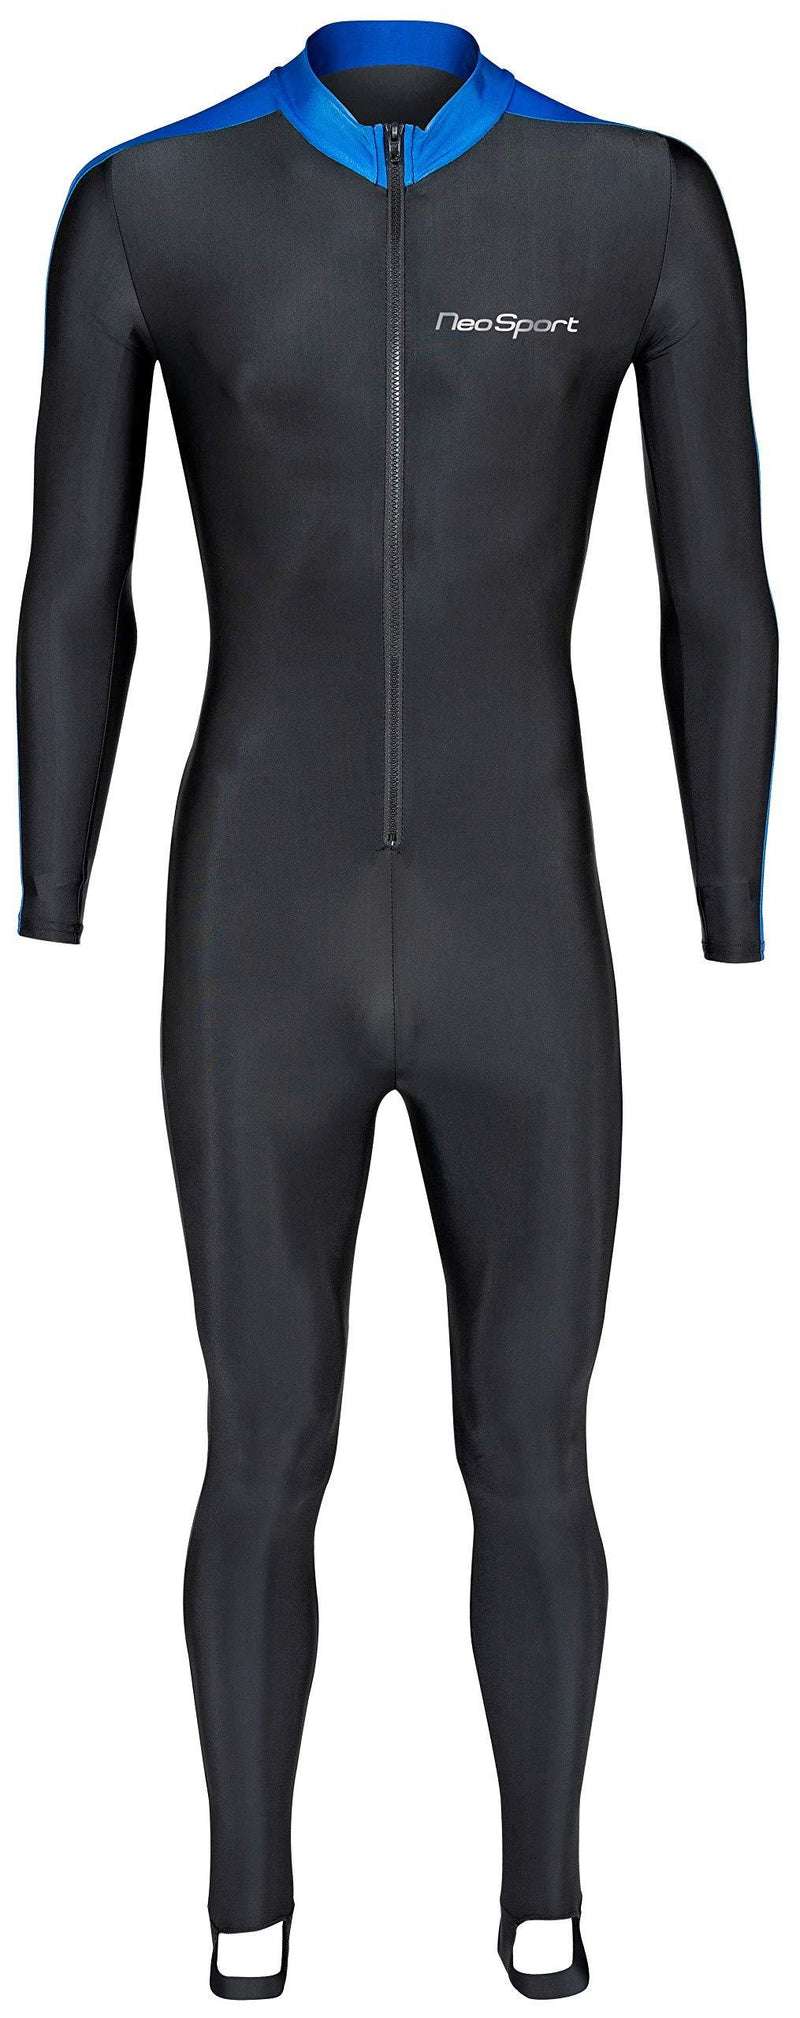 [AUSTRALIA] - NeoSport Full Body Long Sleeve Lycra Sports Suit for Women and Men – Helps Protect Against UV rays and Skin Irritants - Great for Swimming, Snorkeling, Scuba Diving and All Watersports, 